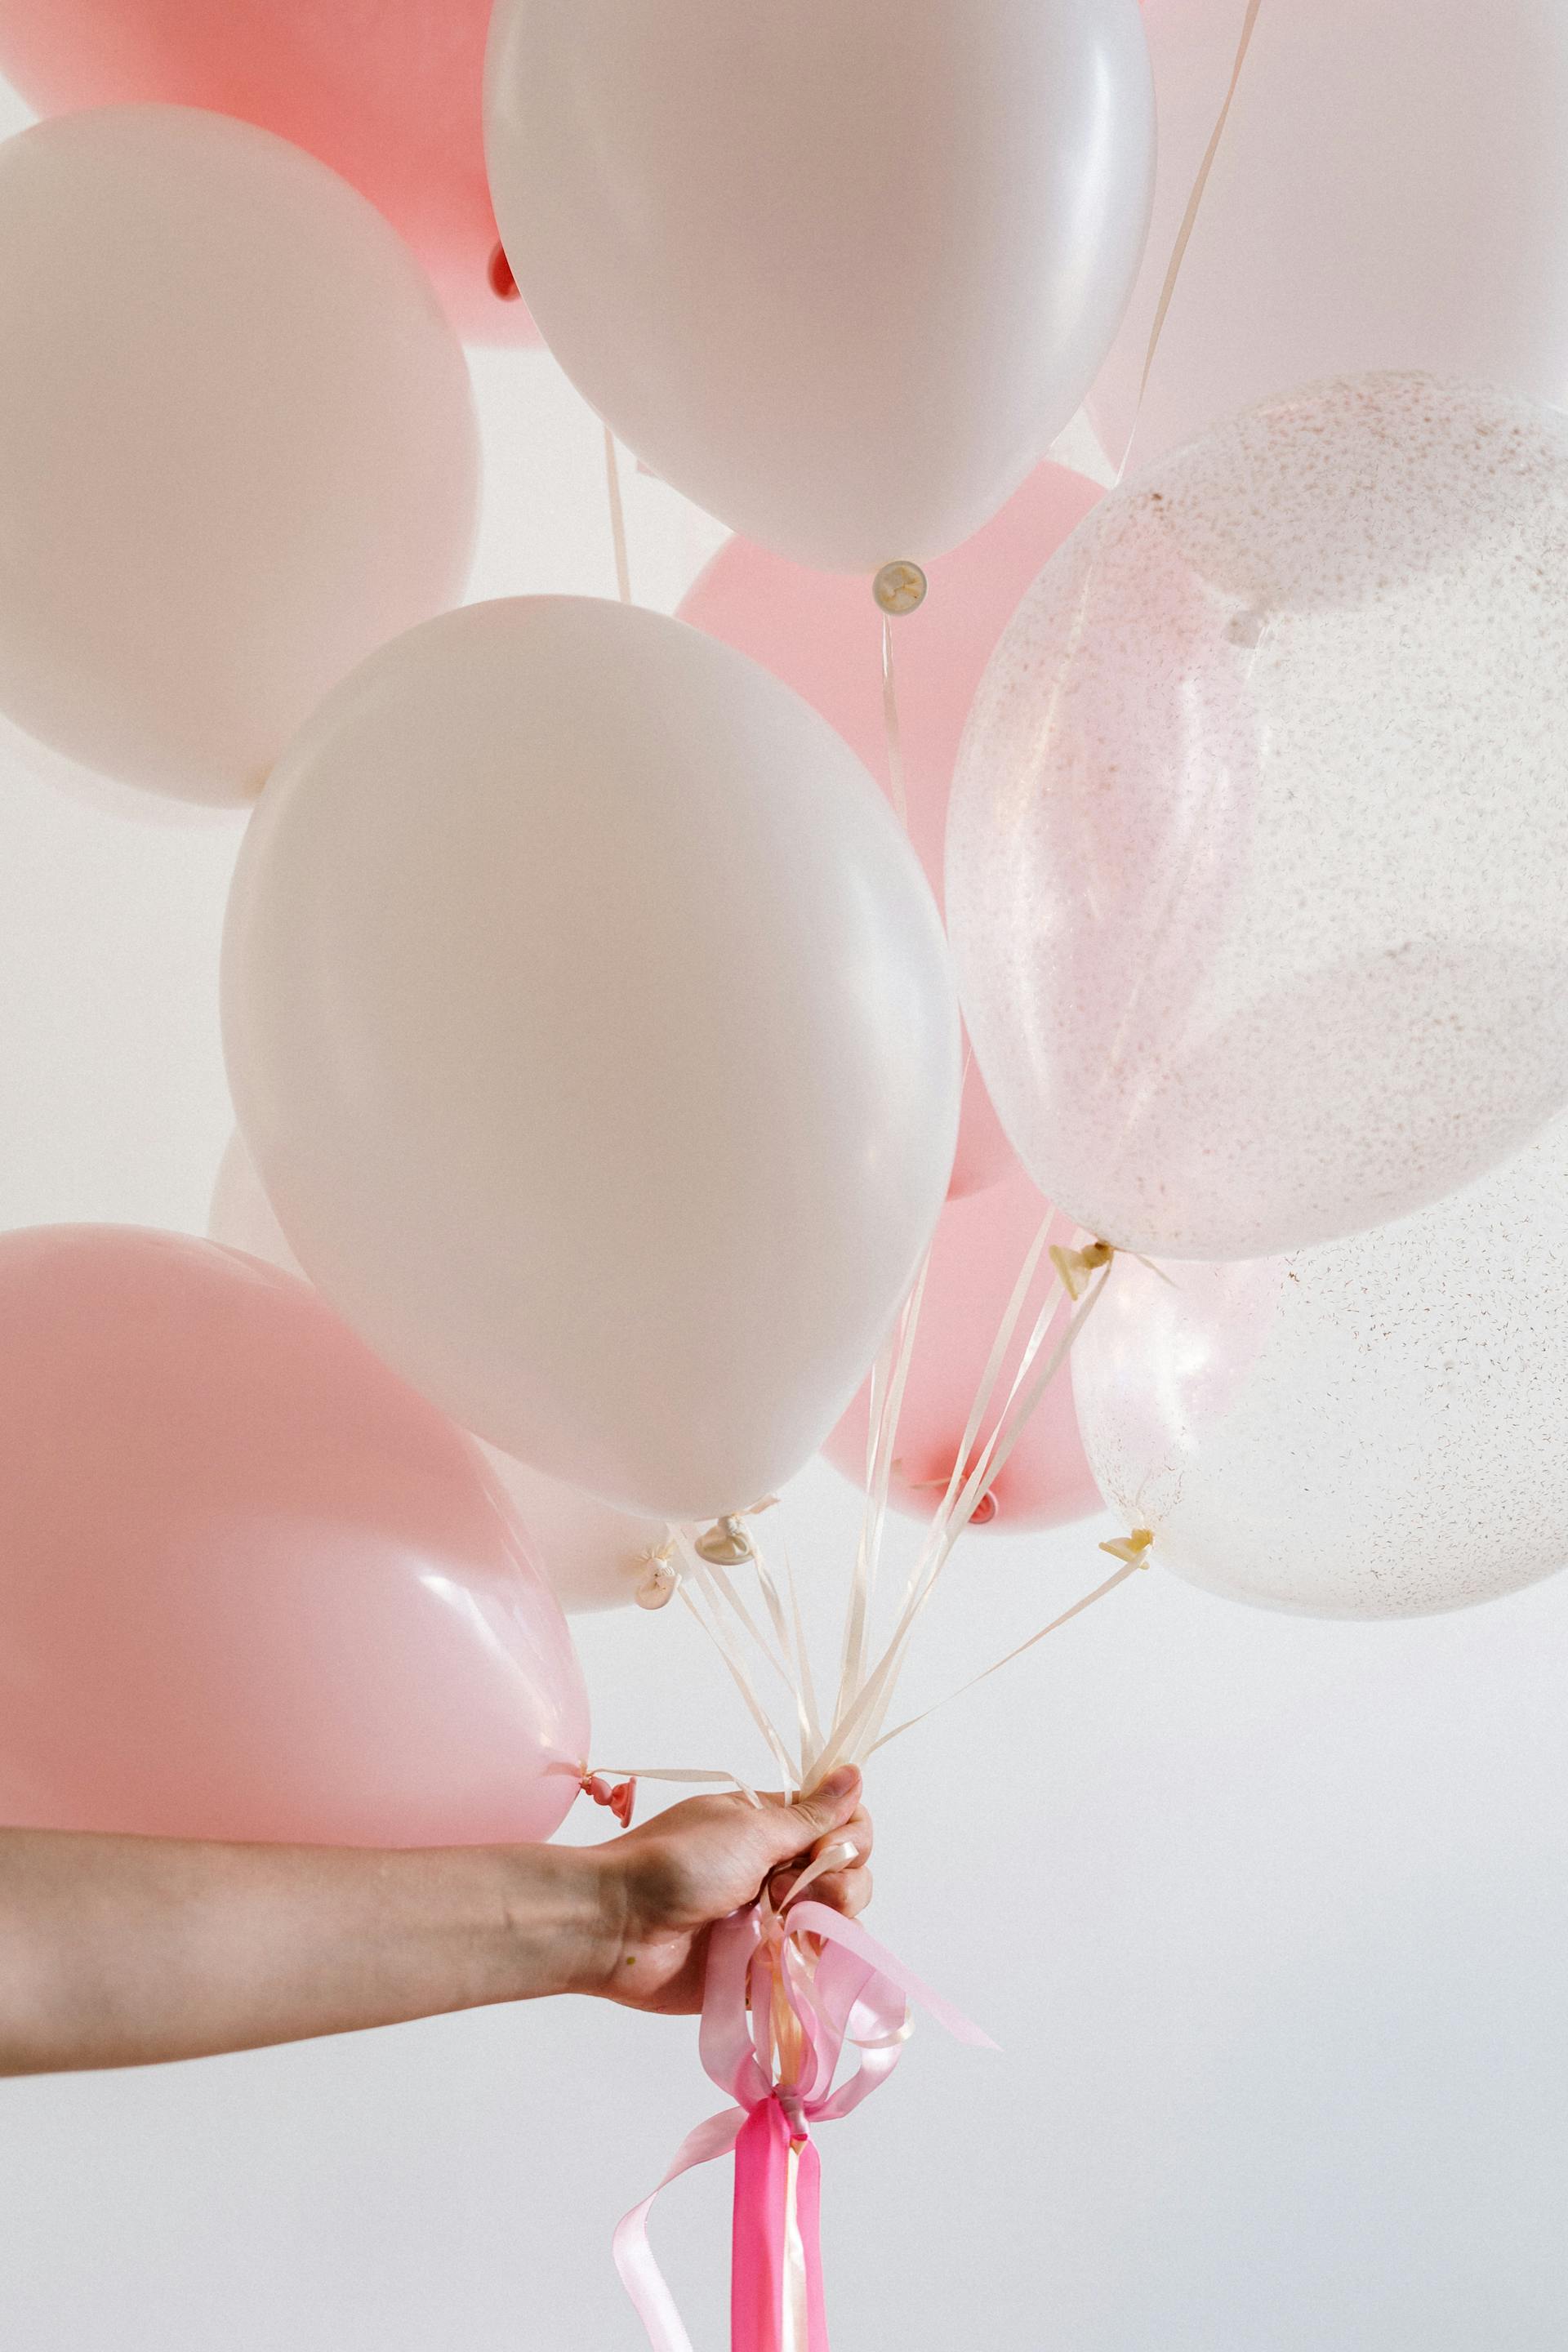 A person holding pink and white balloons | Source: Pexels